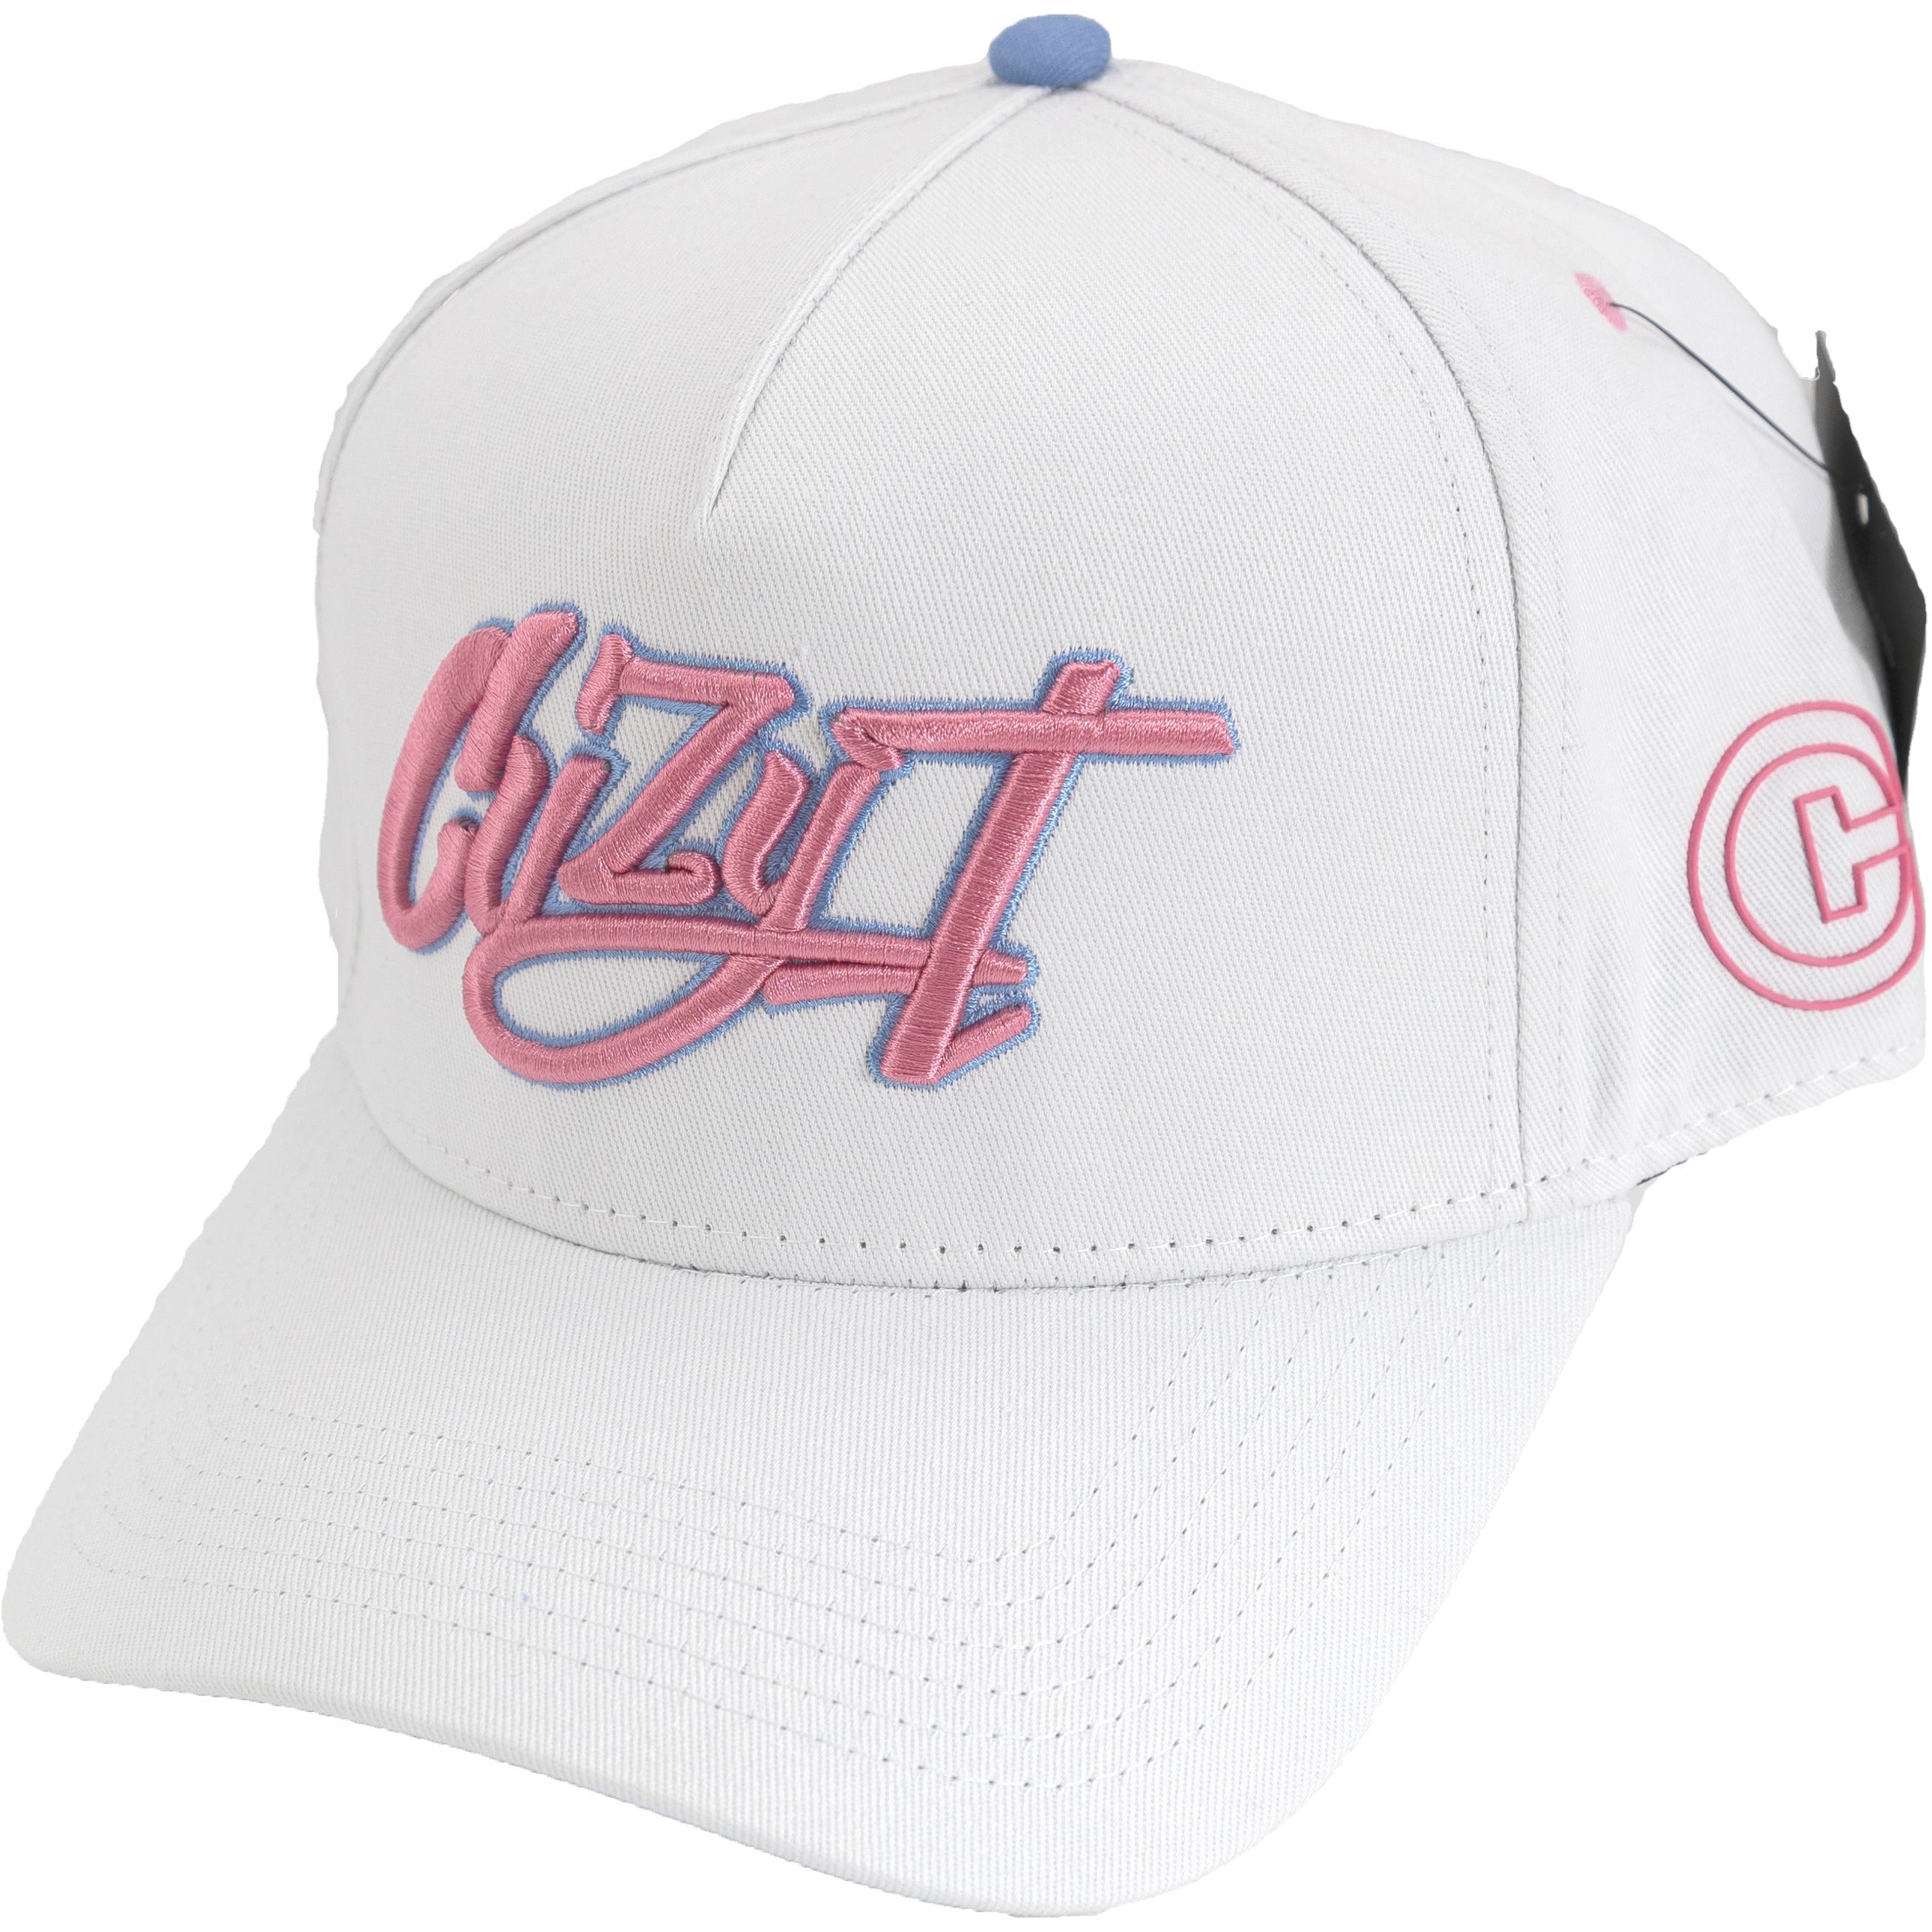 CUZY T EMBROIDERED SNAP BACK - WHITE/PINK - Cuzy T Apparel